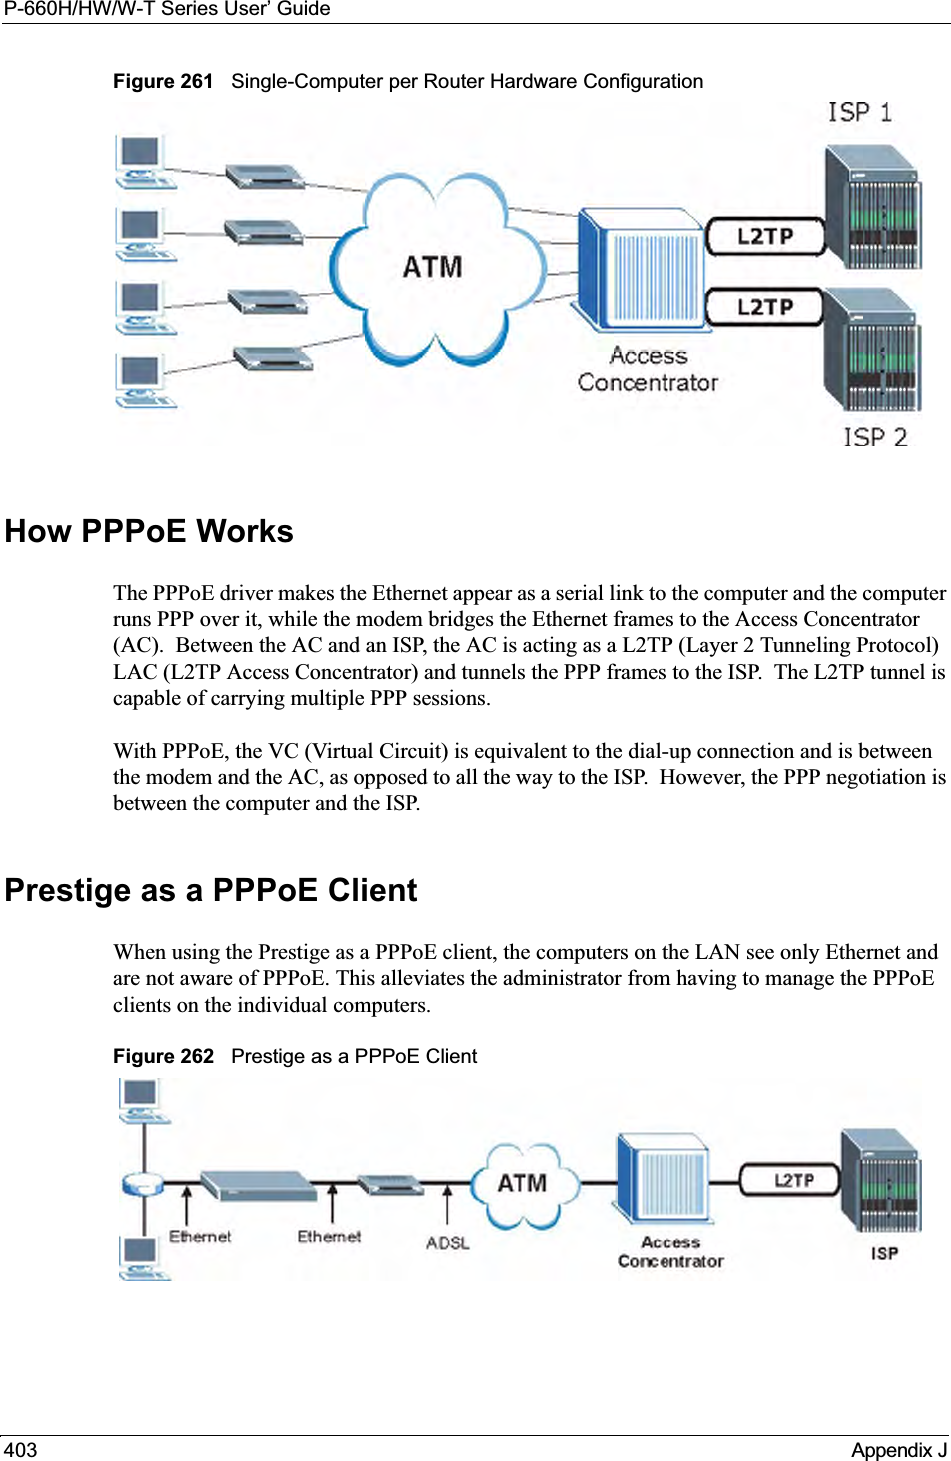 P-660H/HW/W-T Series User’ Guide403 Appendix JFigure 261   Single-Computer per Router Hardware ConfigurationHow PPPoE WorksThe PPPoE driver makes the Ethernet appear as a serial link to the computer and the computer runs PPP over it, while the modem bridges the Ethernet frames to the Access Concentrator (AC).  Between the AC and an ISP, the AC is acting as a L2TP (Layer 2 Tunneling Protocol) LAC (L2TP Access Concentrator) and tunnels the PPP frames to the ISP.  The L2TP tunnel is capable of carrying multiple PPP sessions.With PPPoE, the VC (Virtual Circuit) is equivalent to the dial-up connection and is between the modem and the AC, as opposed to all the way to the ISP.  However, the PPP negotiation is between the computer and the ISP. Prestige as a PPPoE ClientWhen using the Prestige as a PPPoE client, the computers on the LAN see only Ethernet and are not aware of PPPoE. This alleviates the administrator from having to manage the PPPoE clients on the individual computers.Figure 262   Prestige as a PPPoE Client